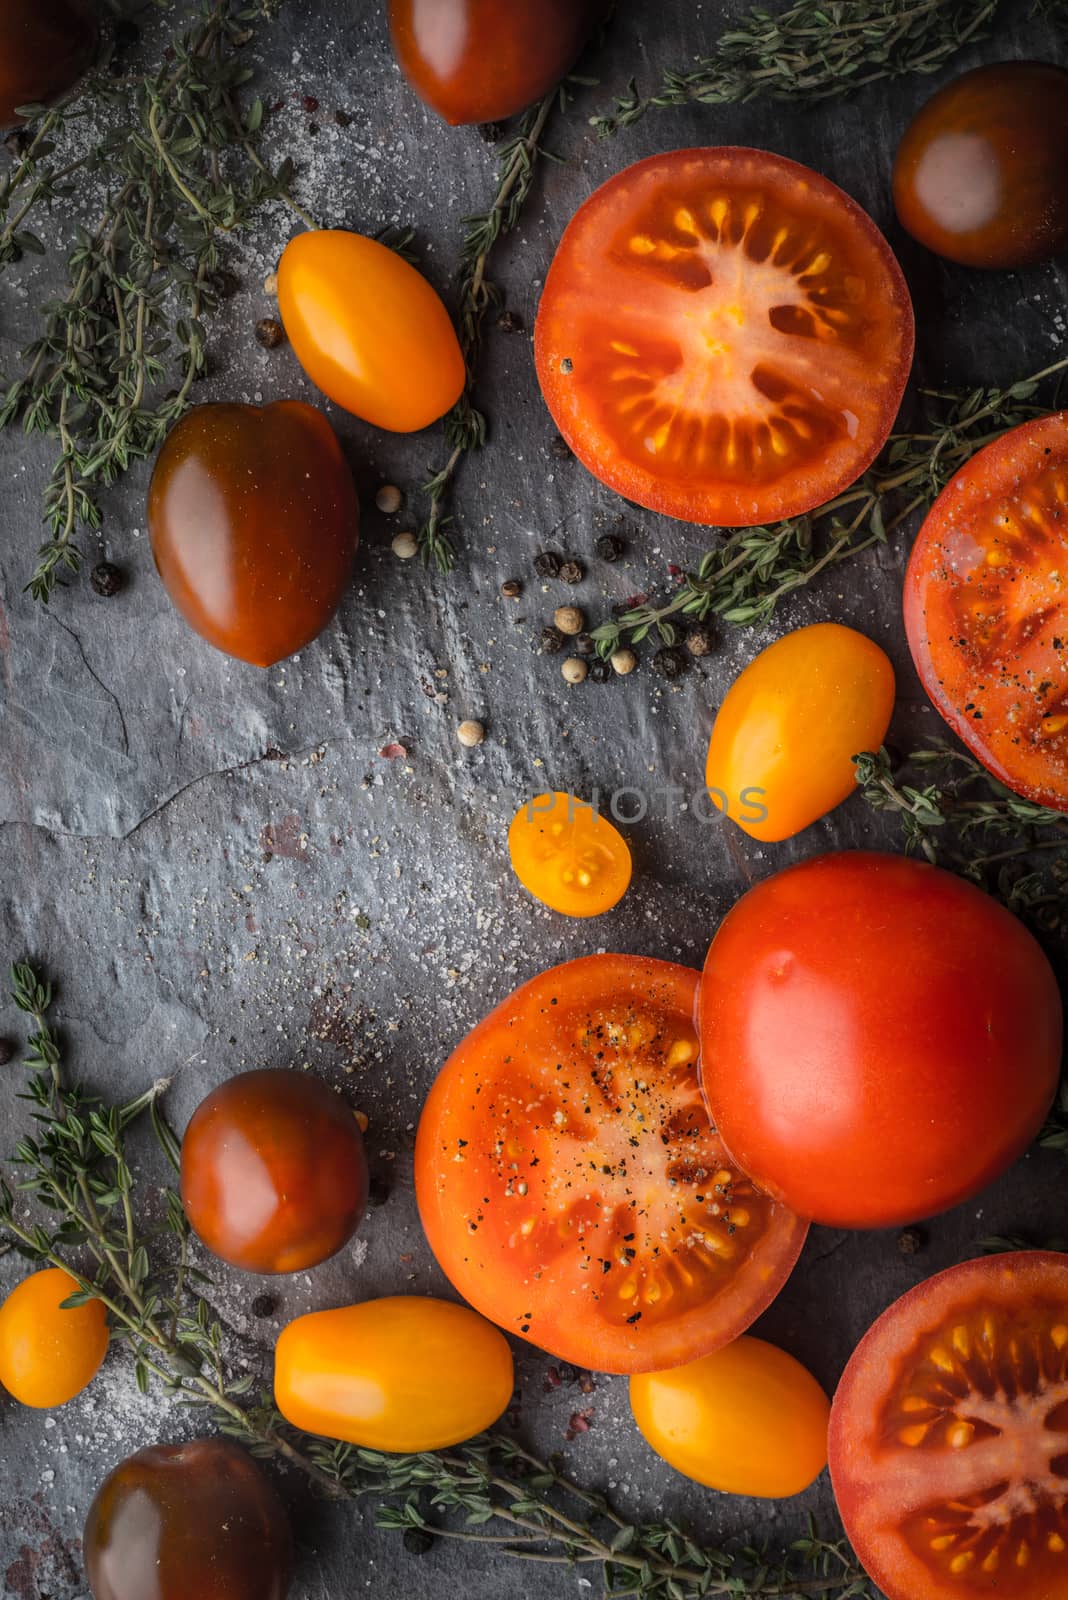 Tomatoes mix  with herbs on the stone table vertical by Deniskarpenkov